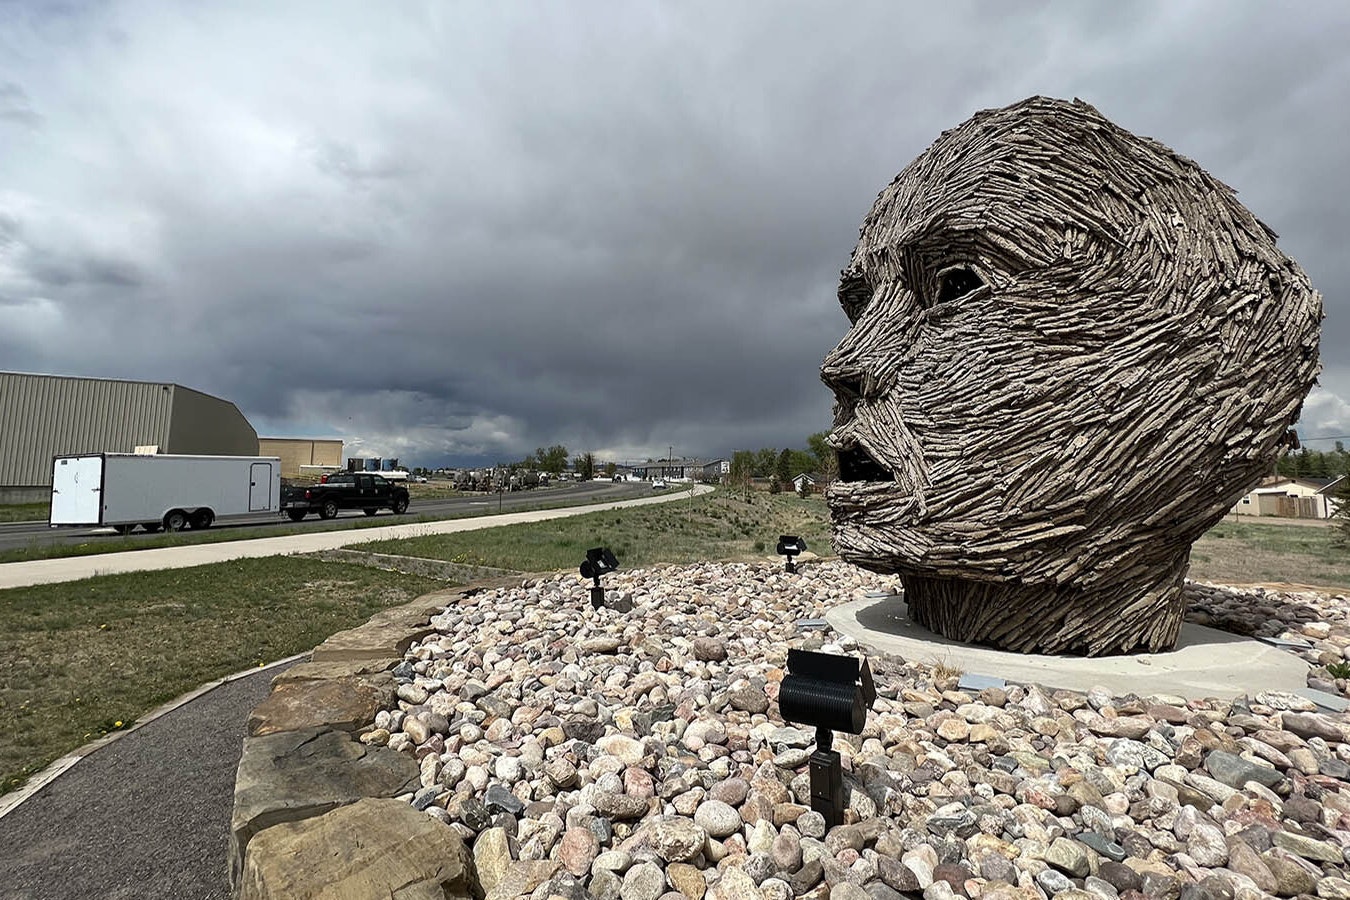 This giant head in West Laramie, Wyoming, has been looking out over Snowy Range Road since 2021. It's titled "Exhaling Dissolution" and is part of a rotating public art display.